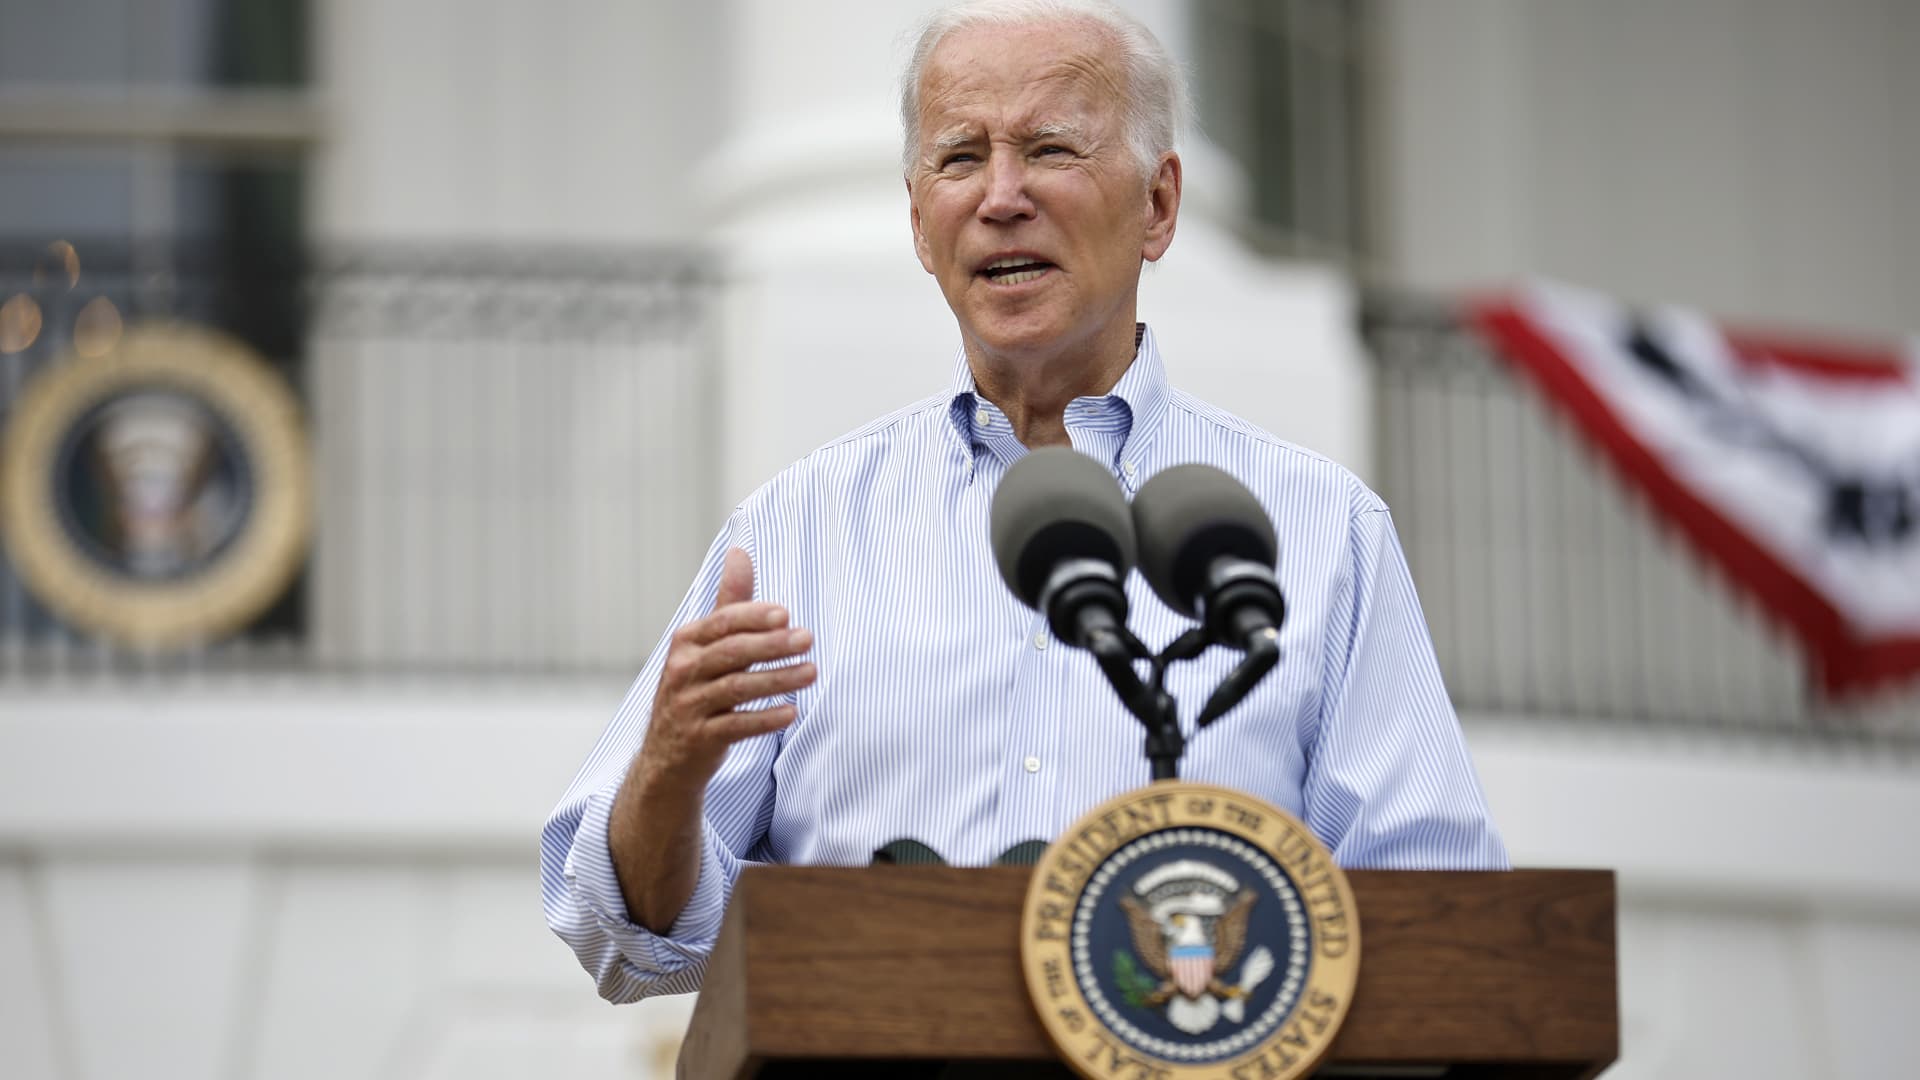 Biden cancels $10,000 in federal student loan debt for most borrowers